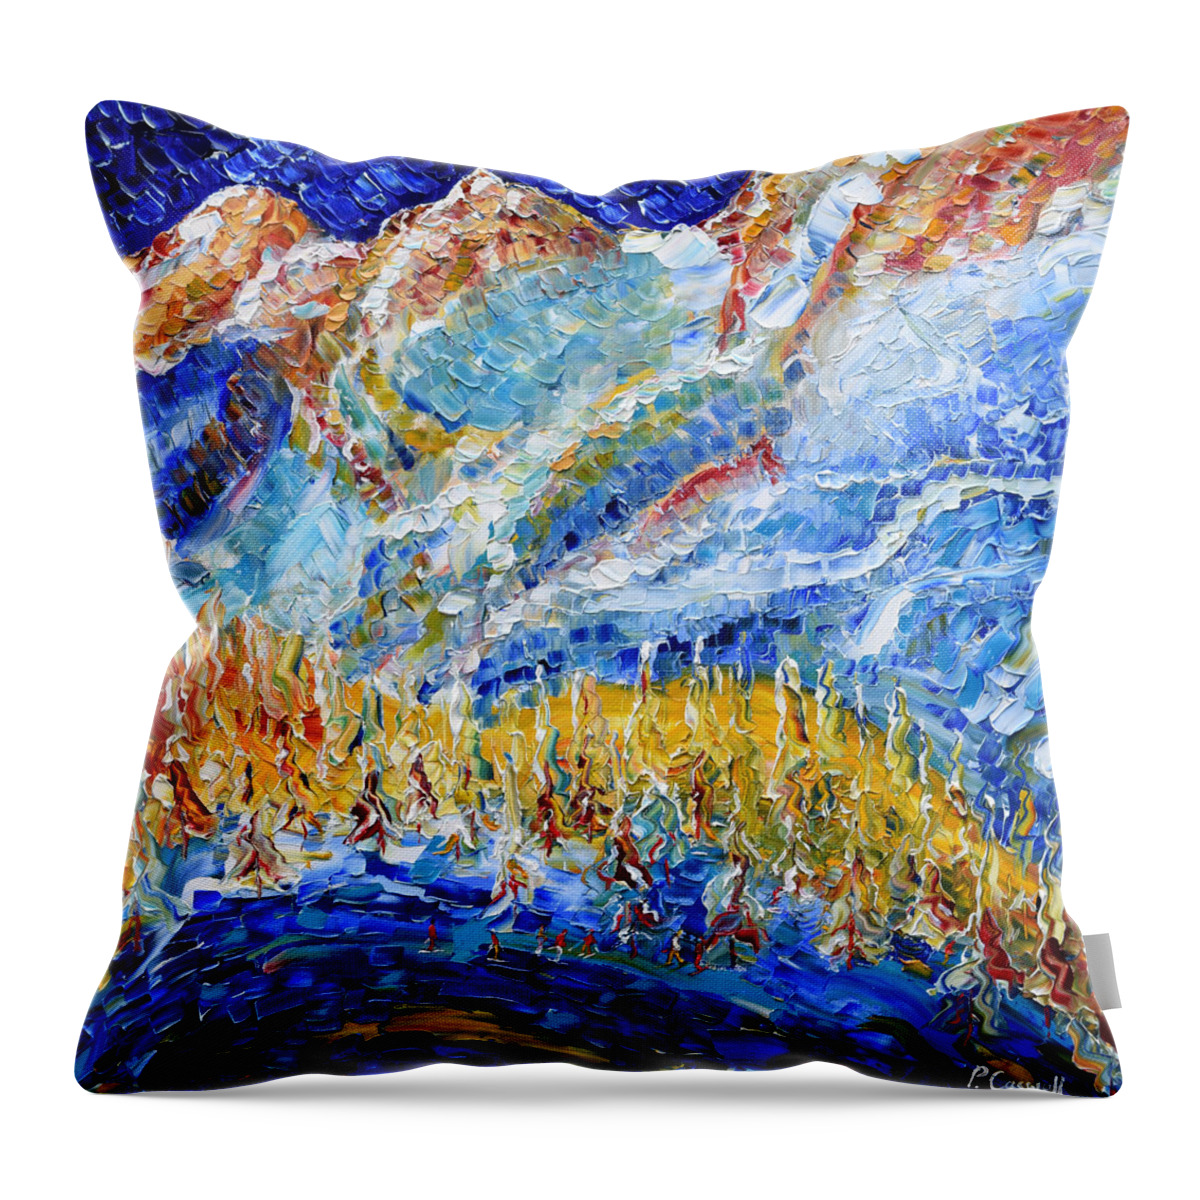 Argentiere Throw Pillow featuring the painting Argentiere Near Chamonix Ski Scene by Pete Caswell